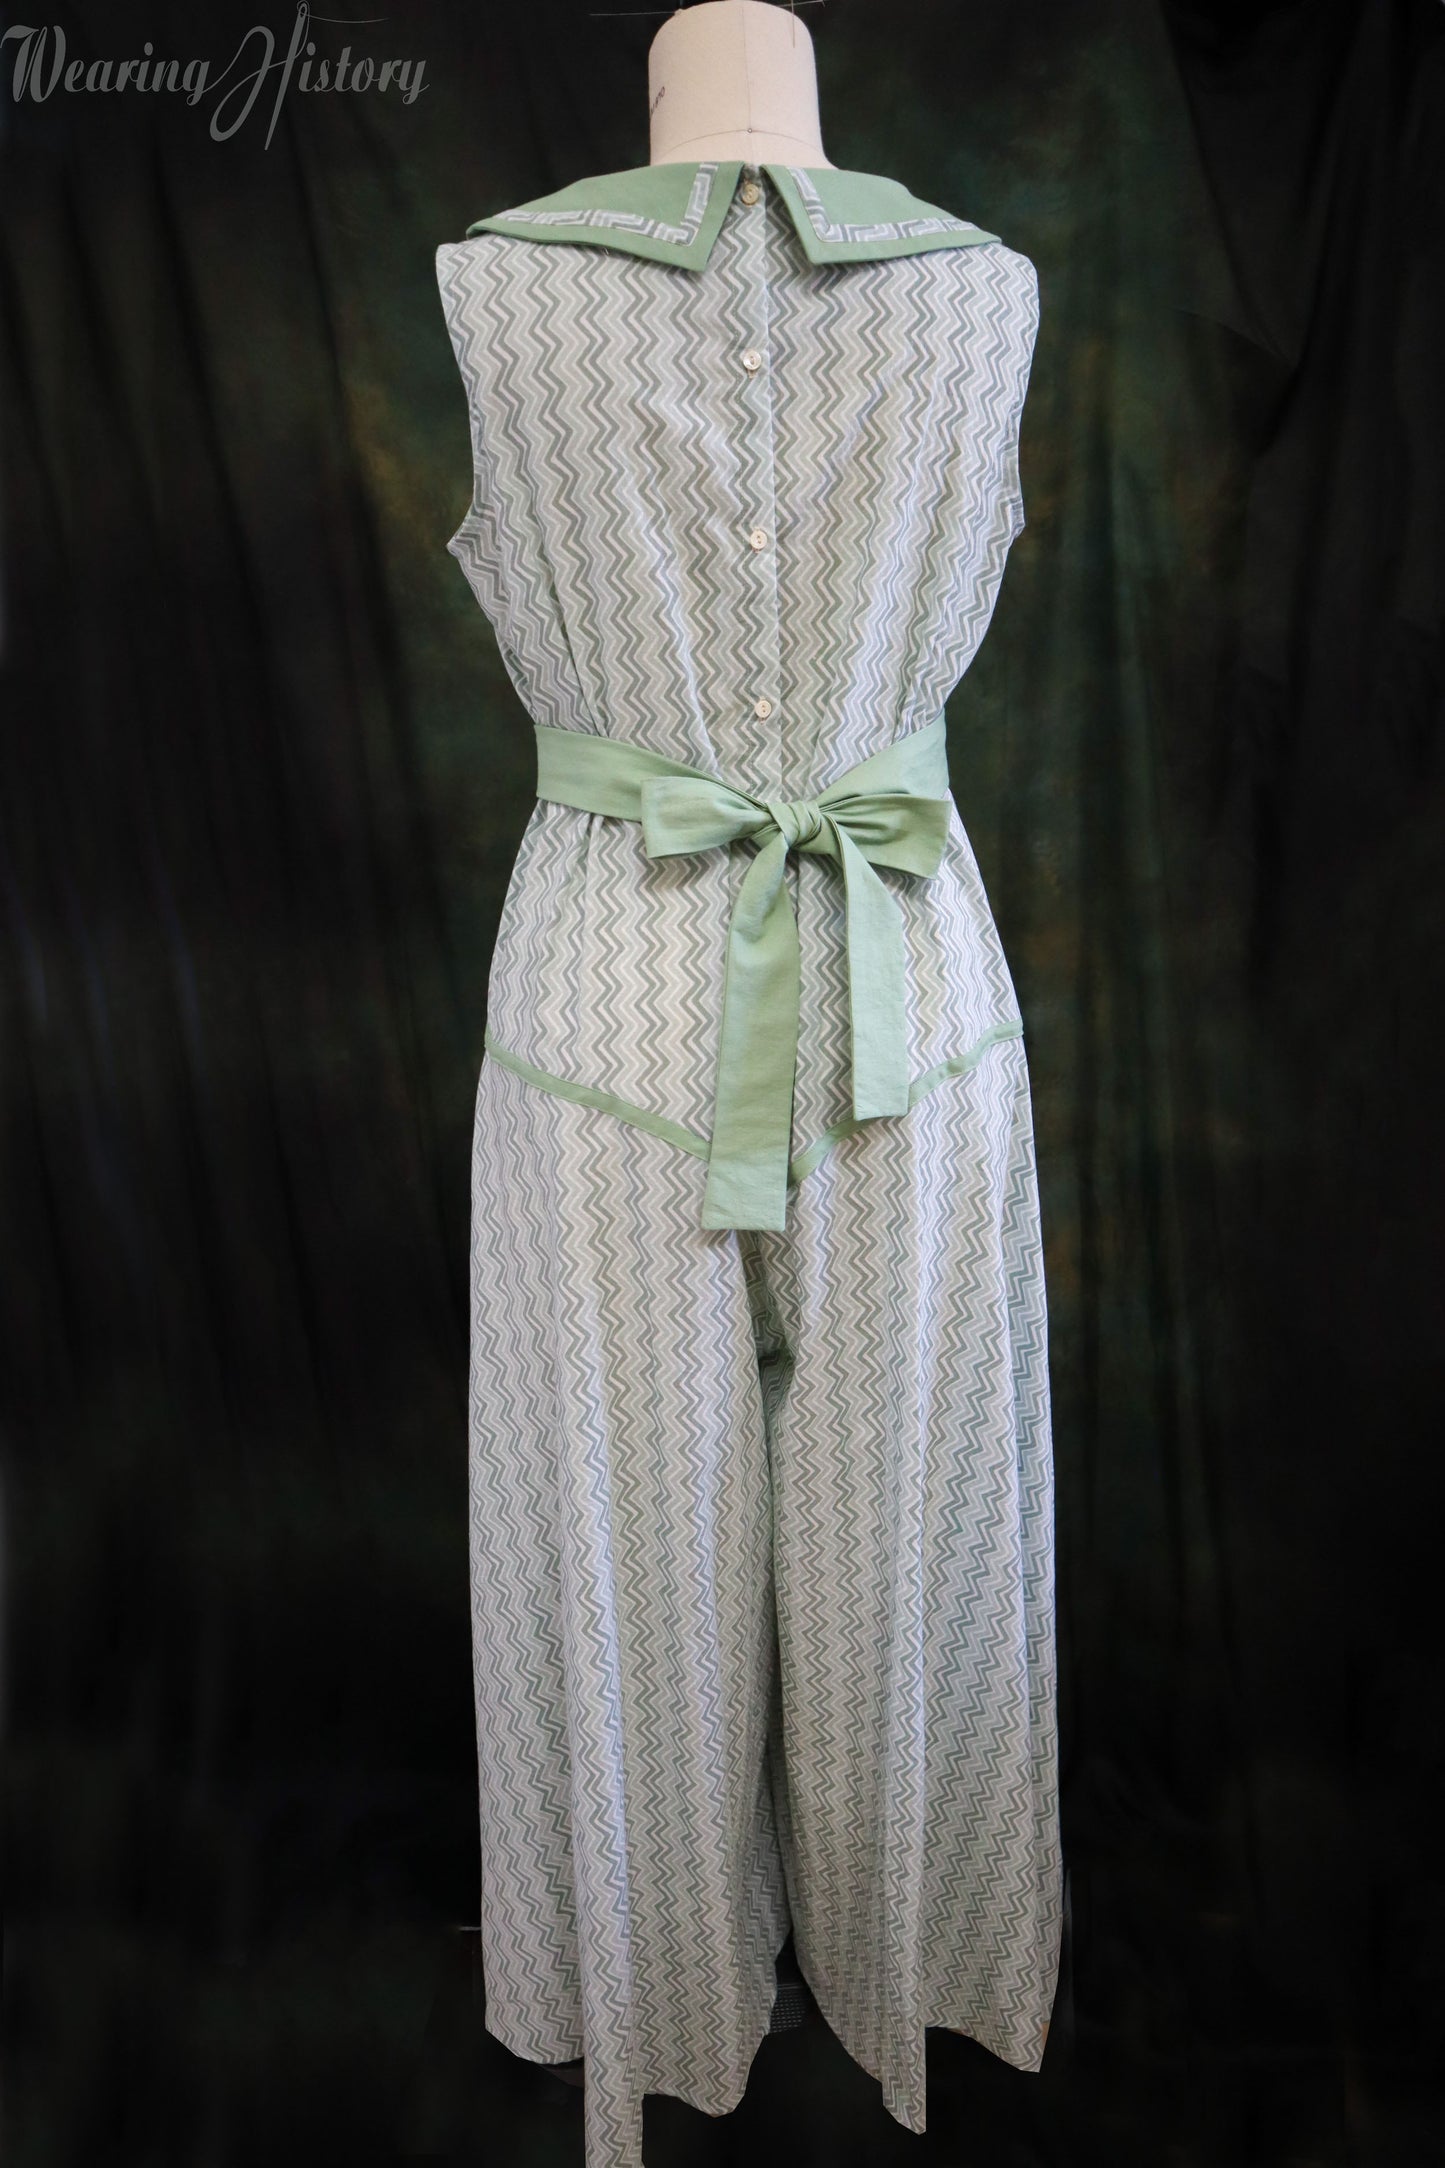 PRINTED PATTERN- Lounging at the Lido- 1930s Beach or Lounging Pajamas and Eton Jacket- 30"-46" Bust